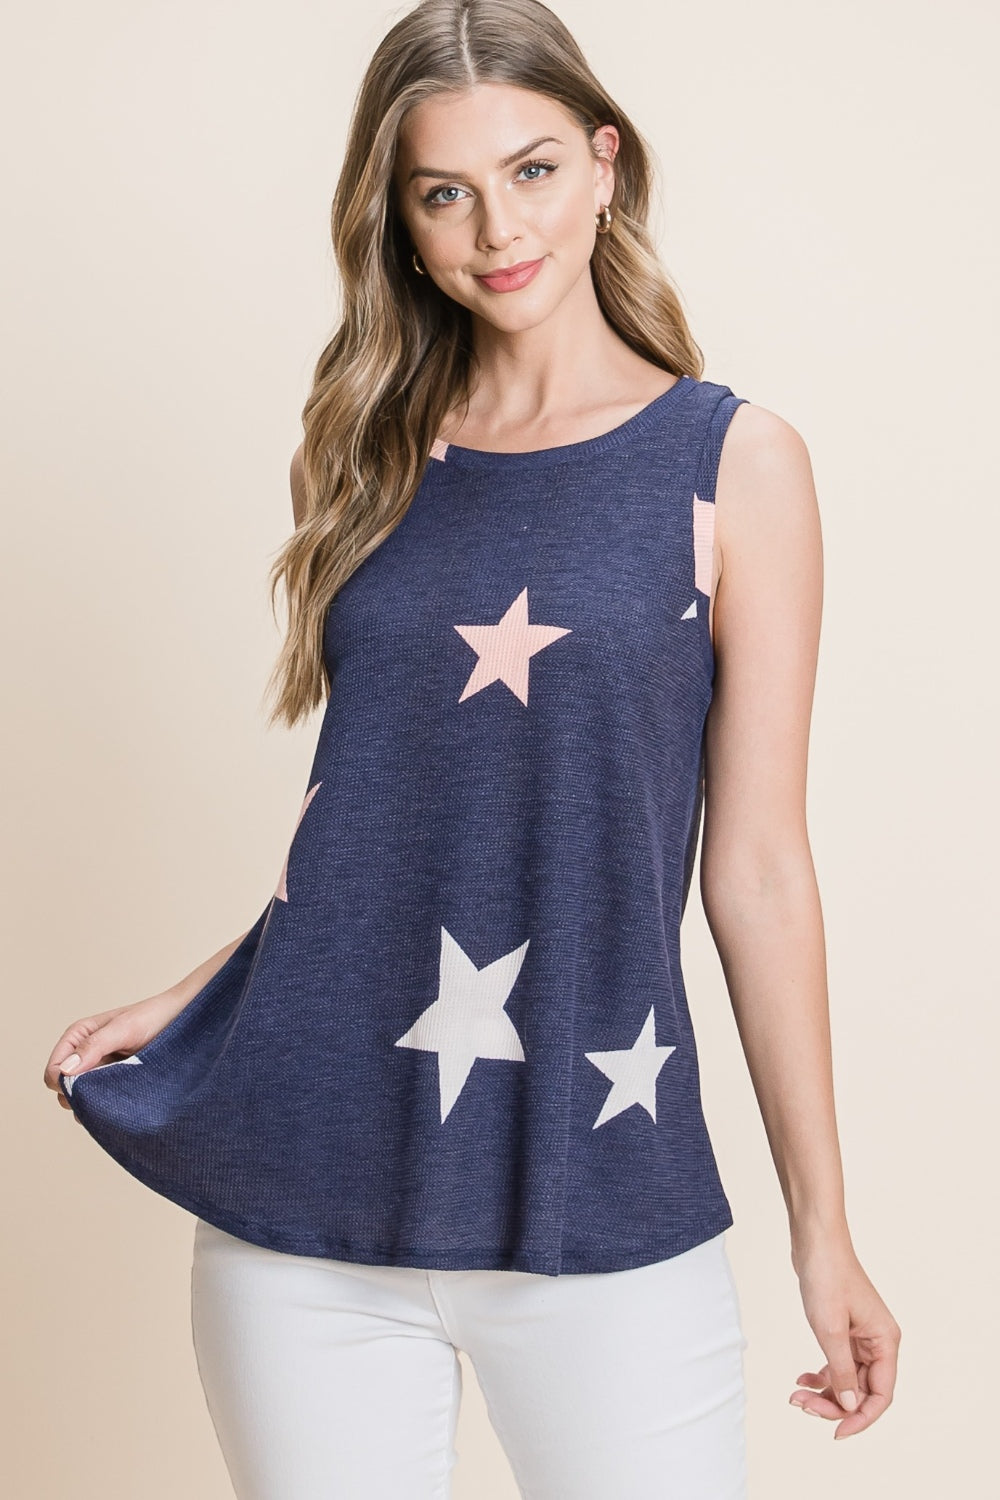 LAST ONE Size SM Remaining, BOMBOM Star Print Tank Top,   USA 🇺🇸  Made Women's Apparel Casual Attire 4th of July